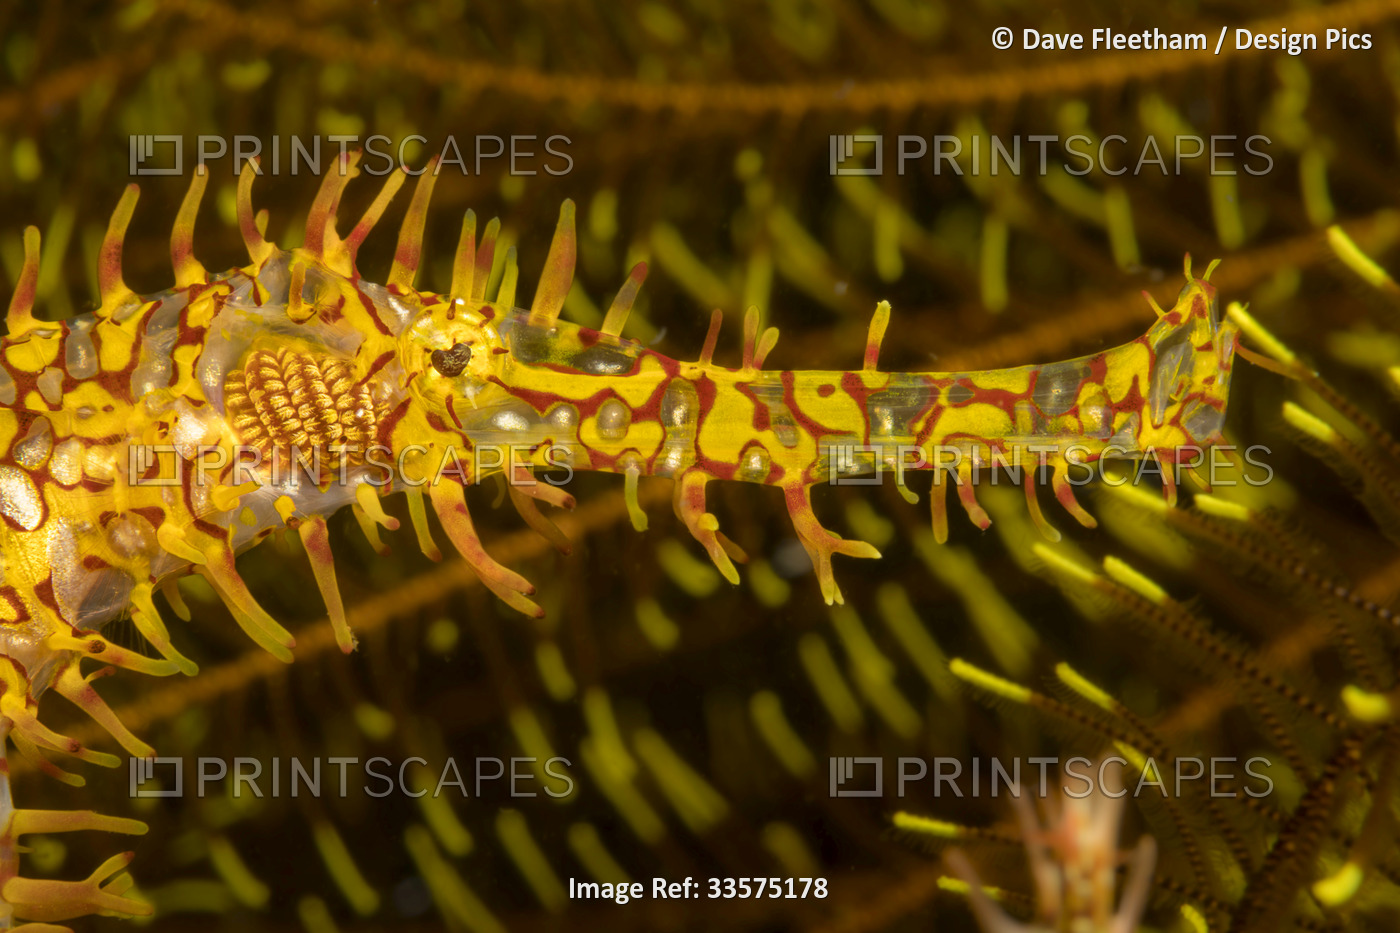 This Ornate ghost pipefish is also known as a Harlequin ghost pipefish ...